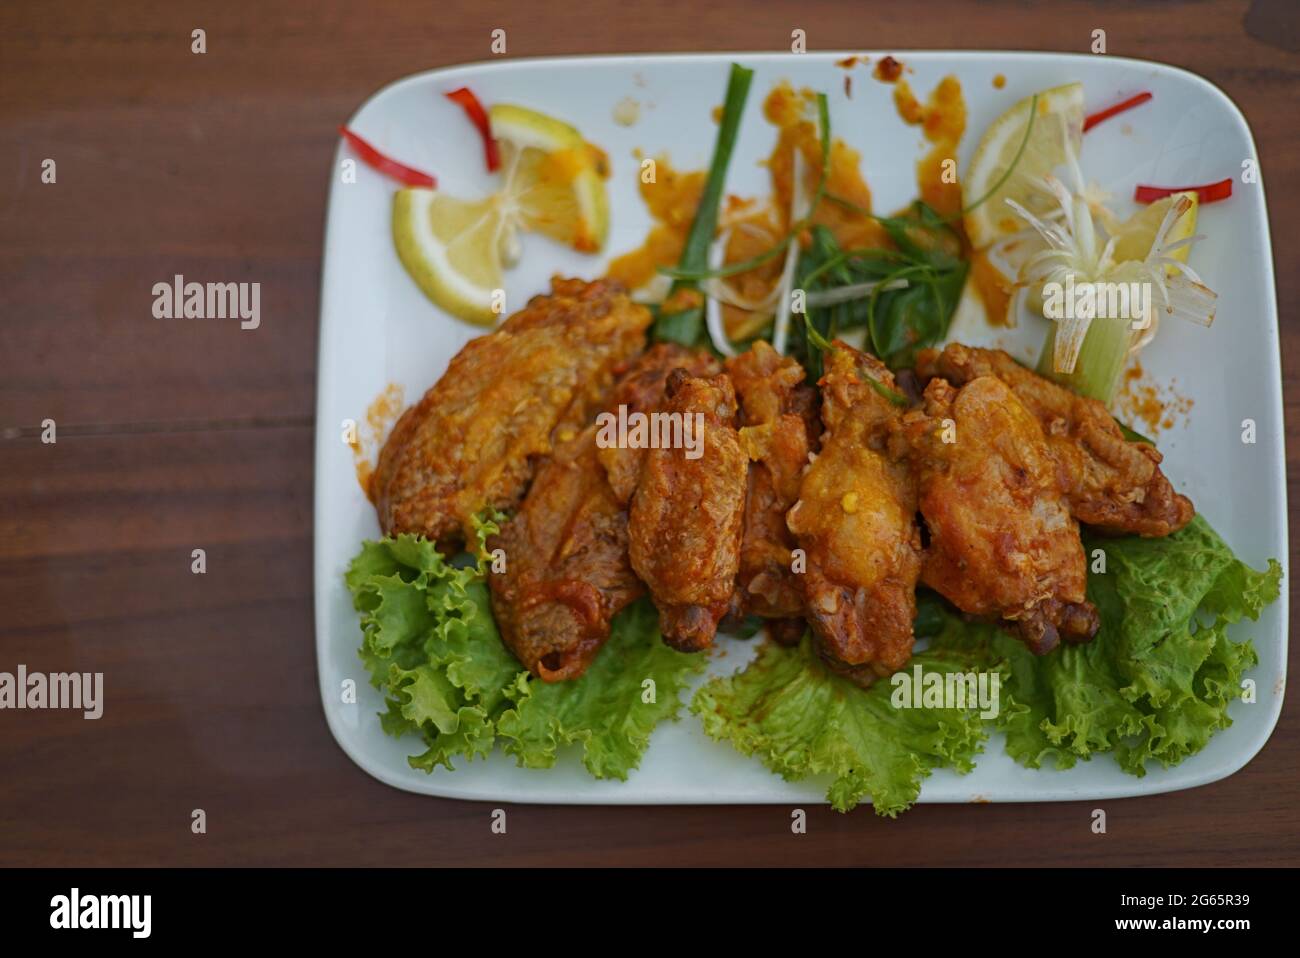 Delicious fried chicken butter in white plate. Chili and lime slice as garnish. Indonesian cuisine. Stock Photo